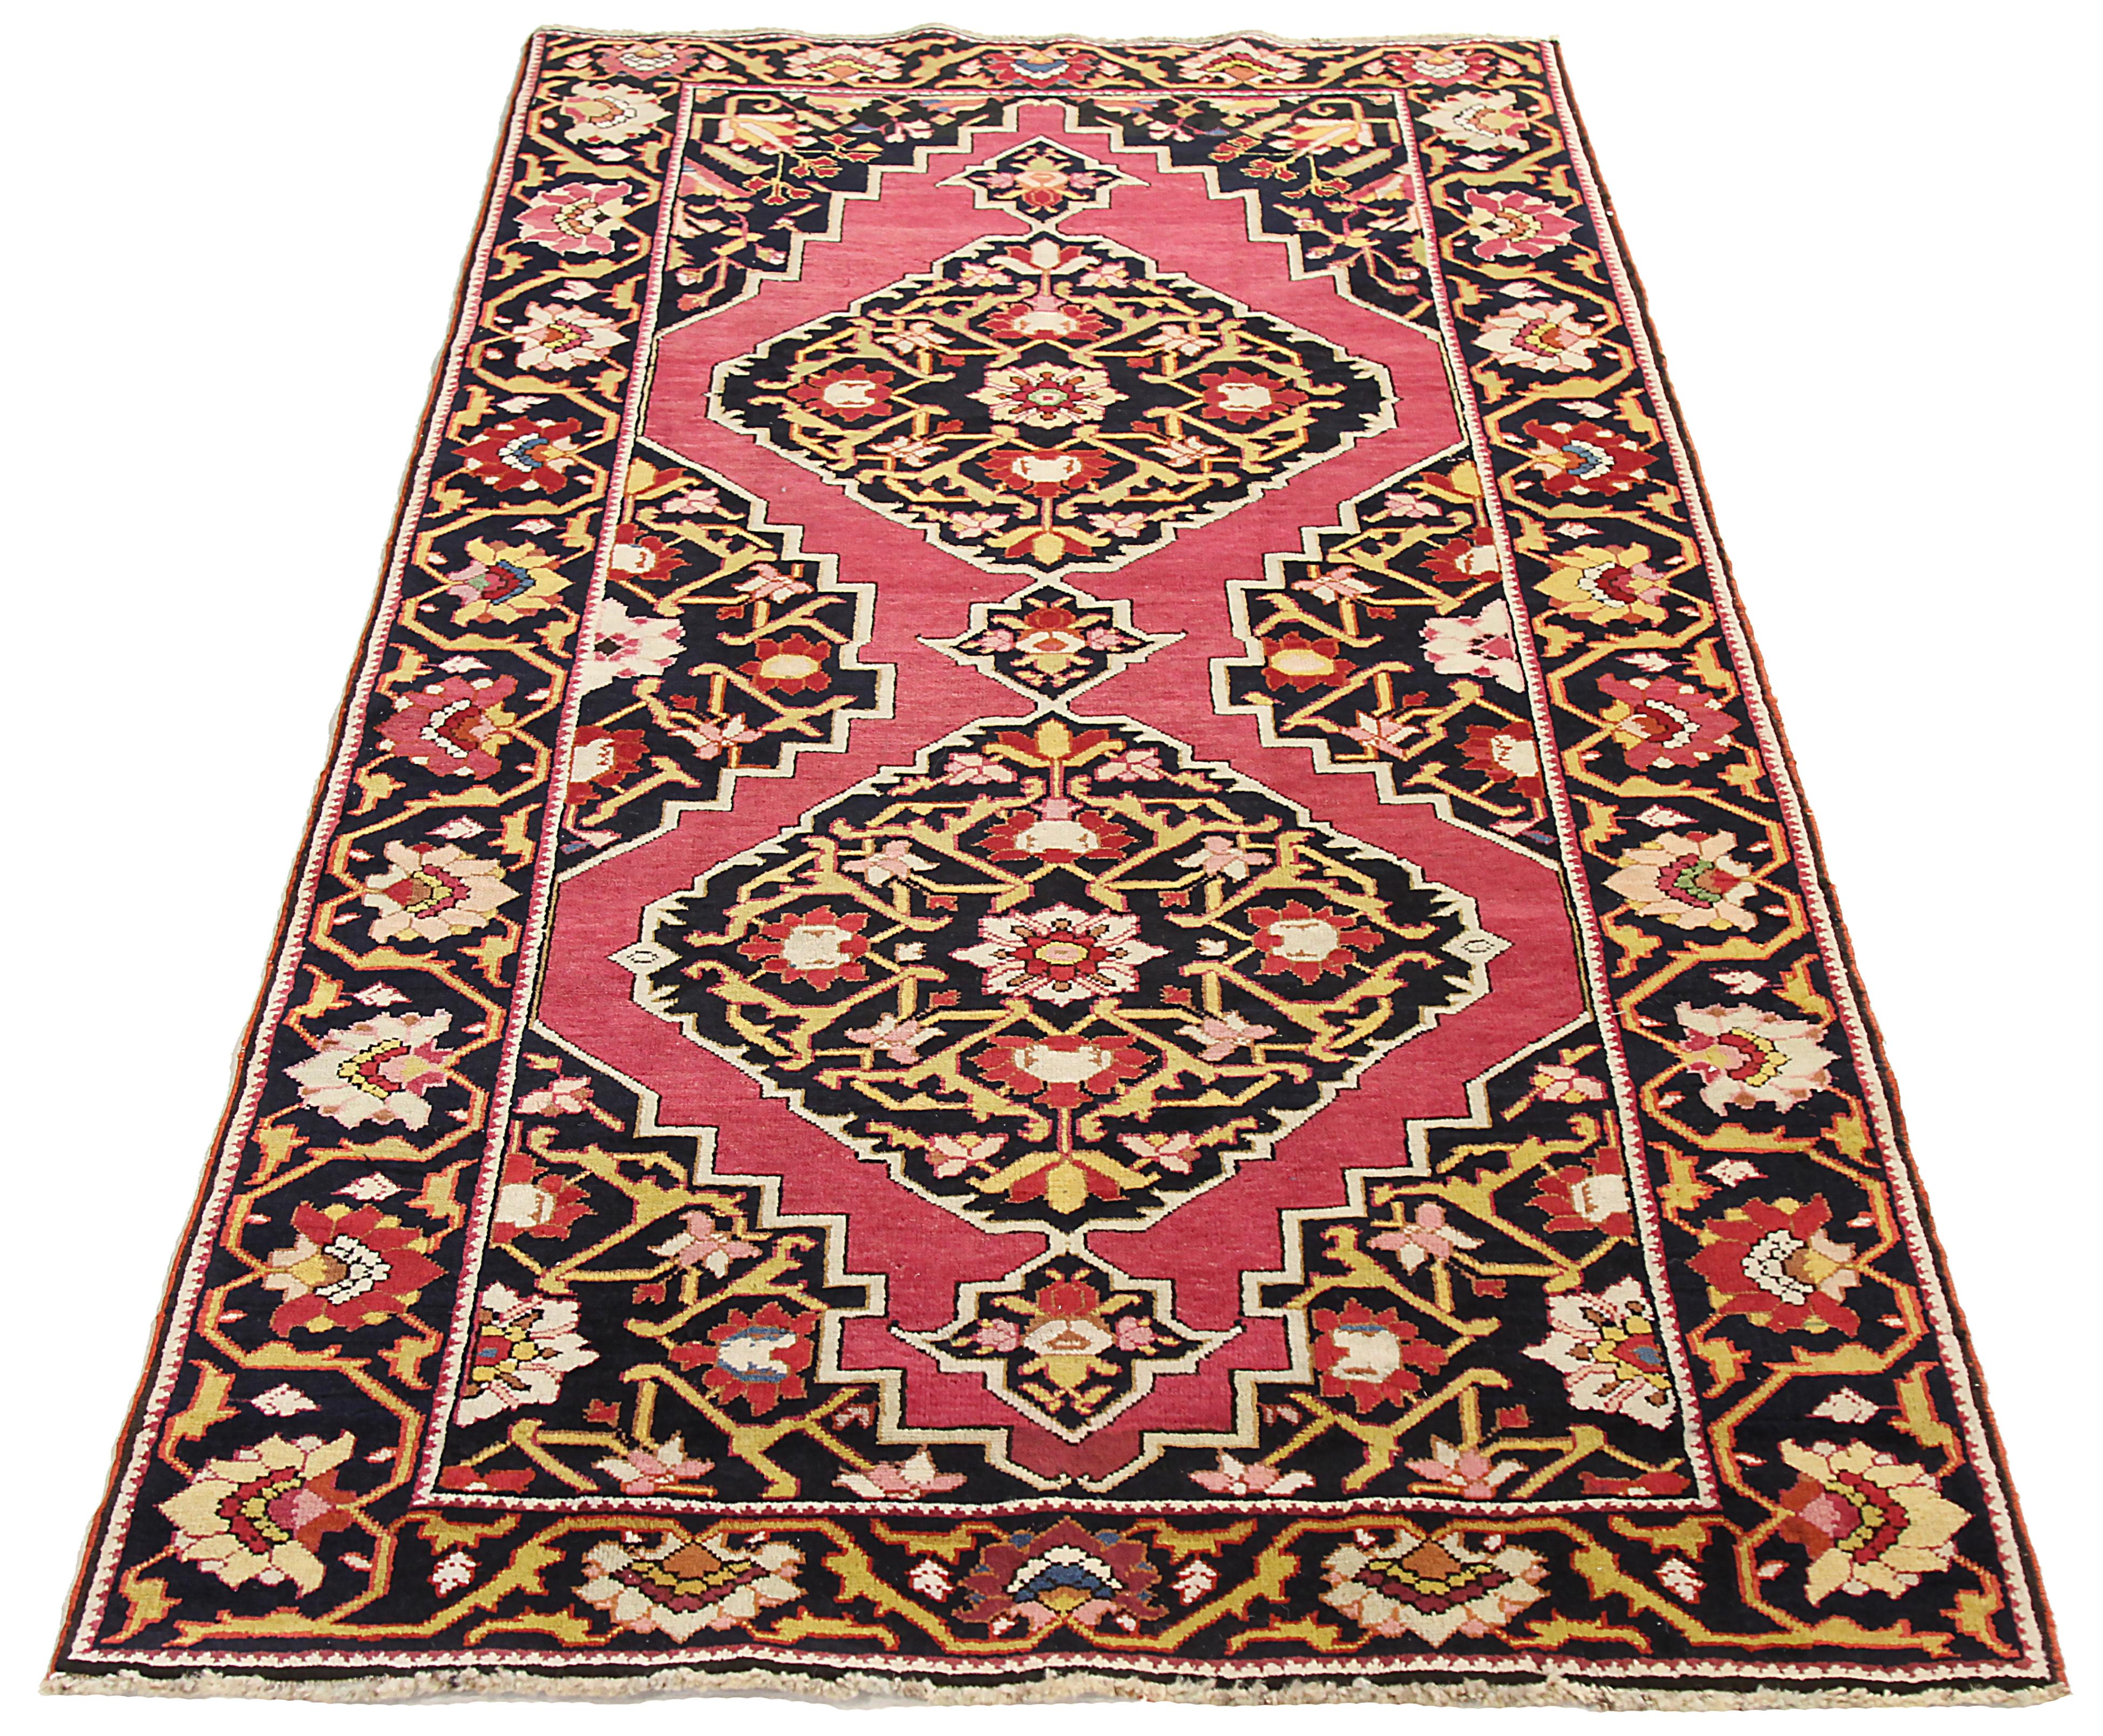 Antique Persian area rug handwoven from the finest sheep’s wool. It’s colored with all-natural vegetable dyes that are safe for humans and pets. It’s a traditional Azerbaijan design featuring floral patterns on a black field. It’s a lovely piece to